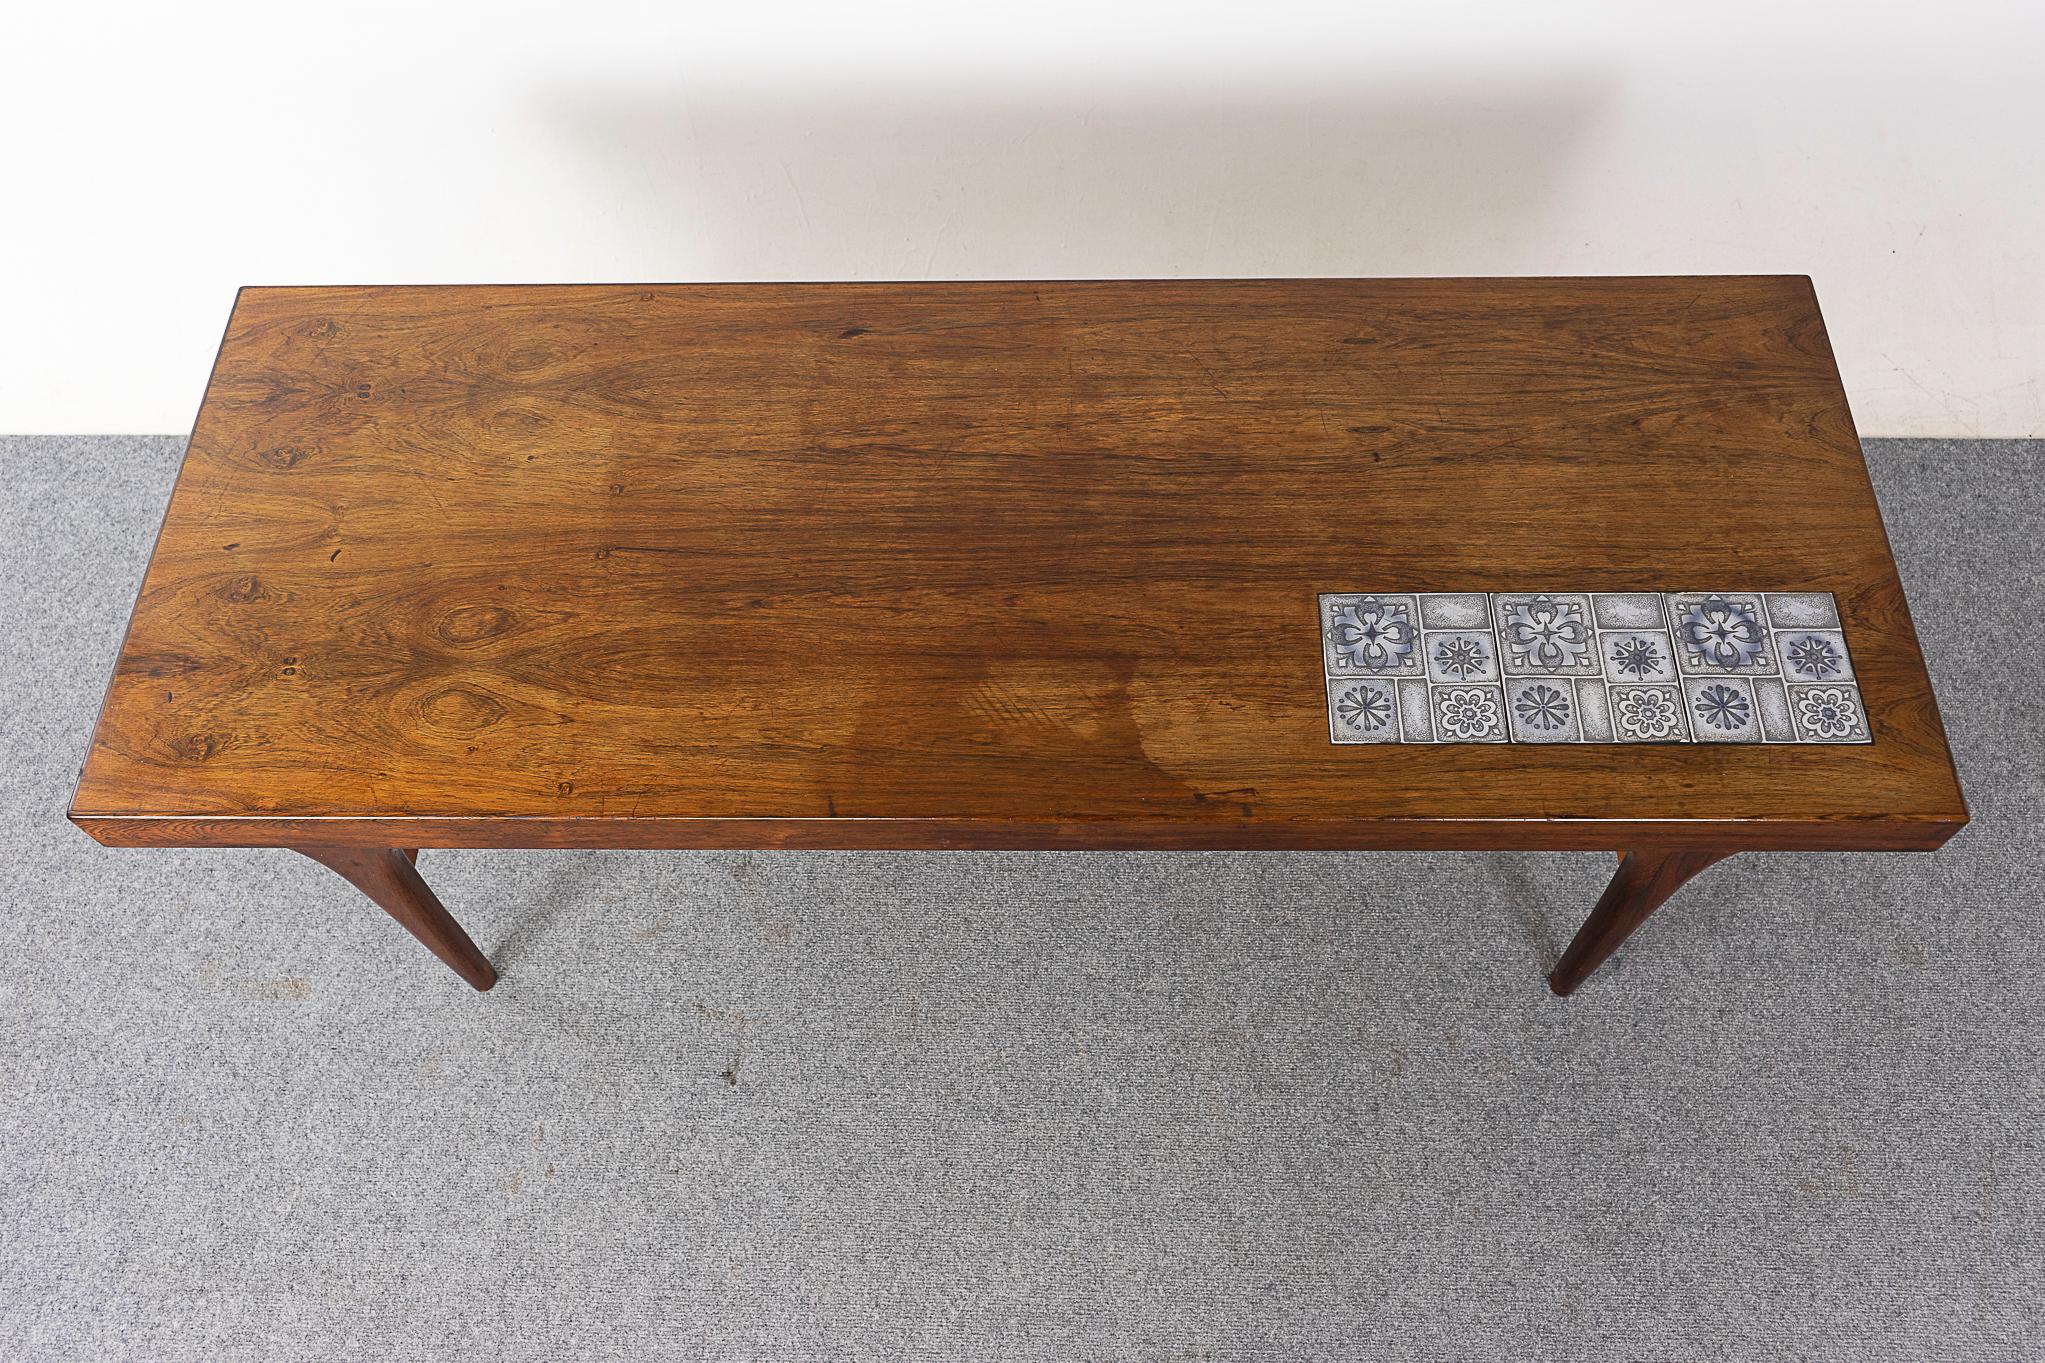 Mid-20th Century Danish Mid-Century Modern Rosewood & Tile Coffee Table by Johannes Andersen For Sale